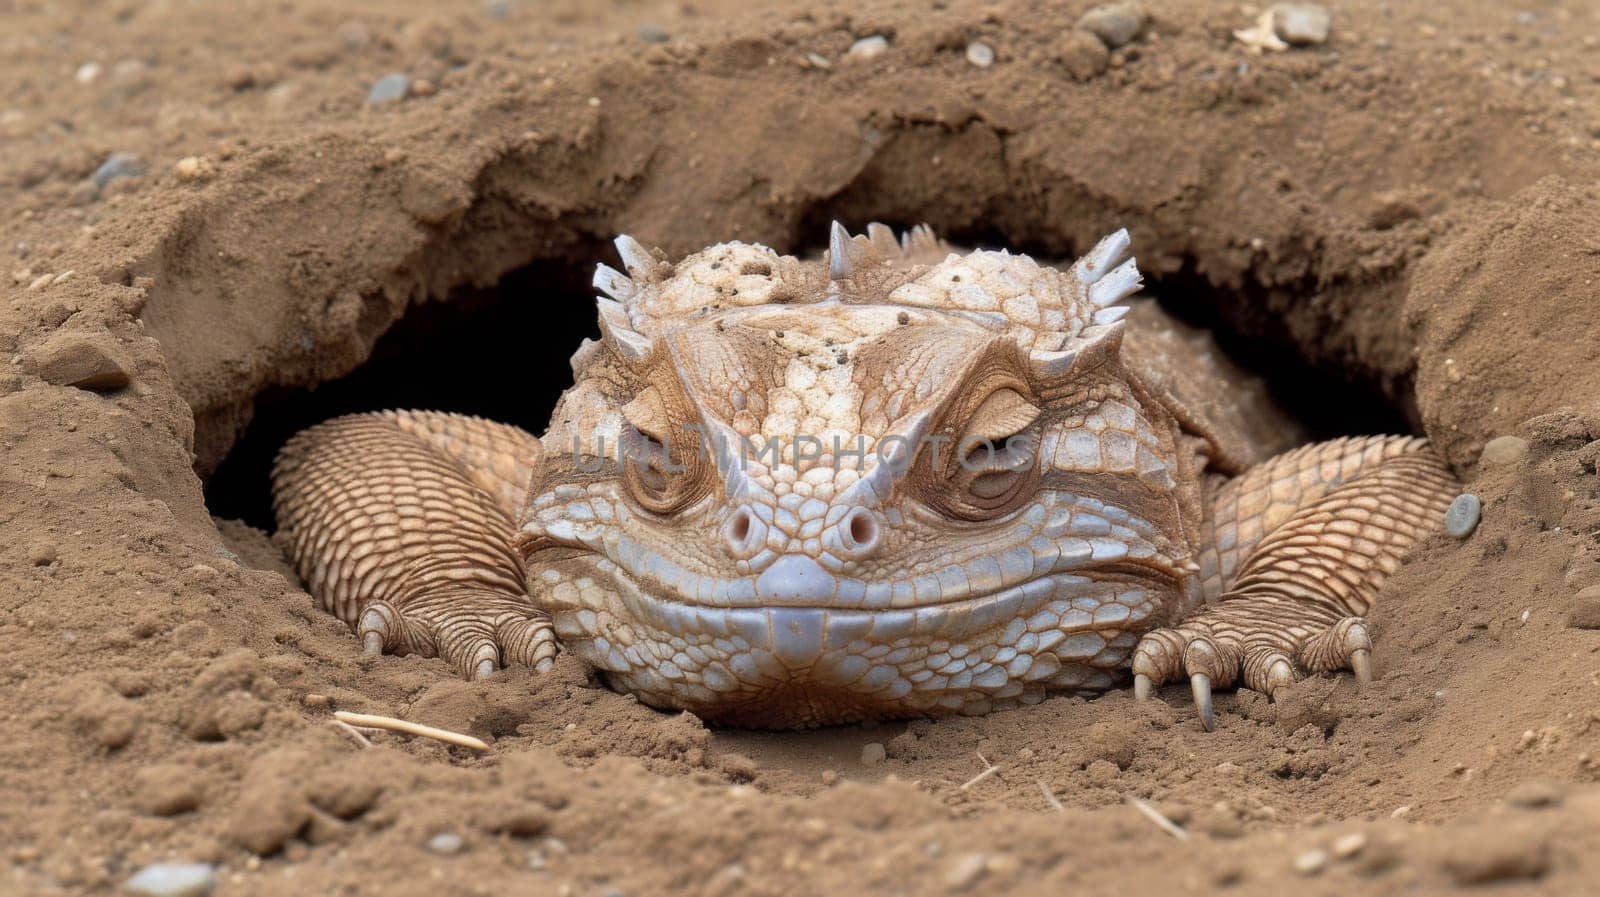 A lizard is sitting in a hole with its head sticking out, AI by starush